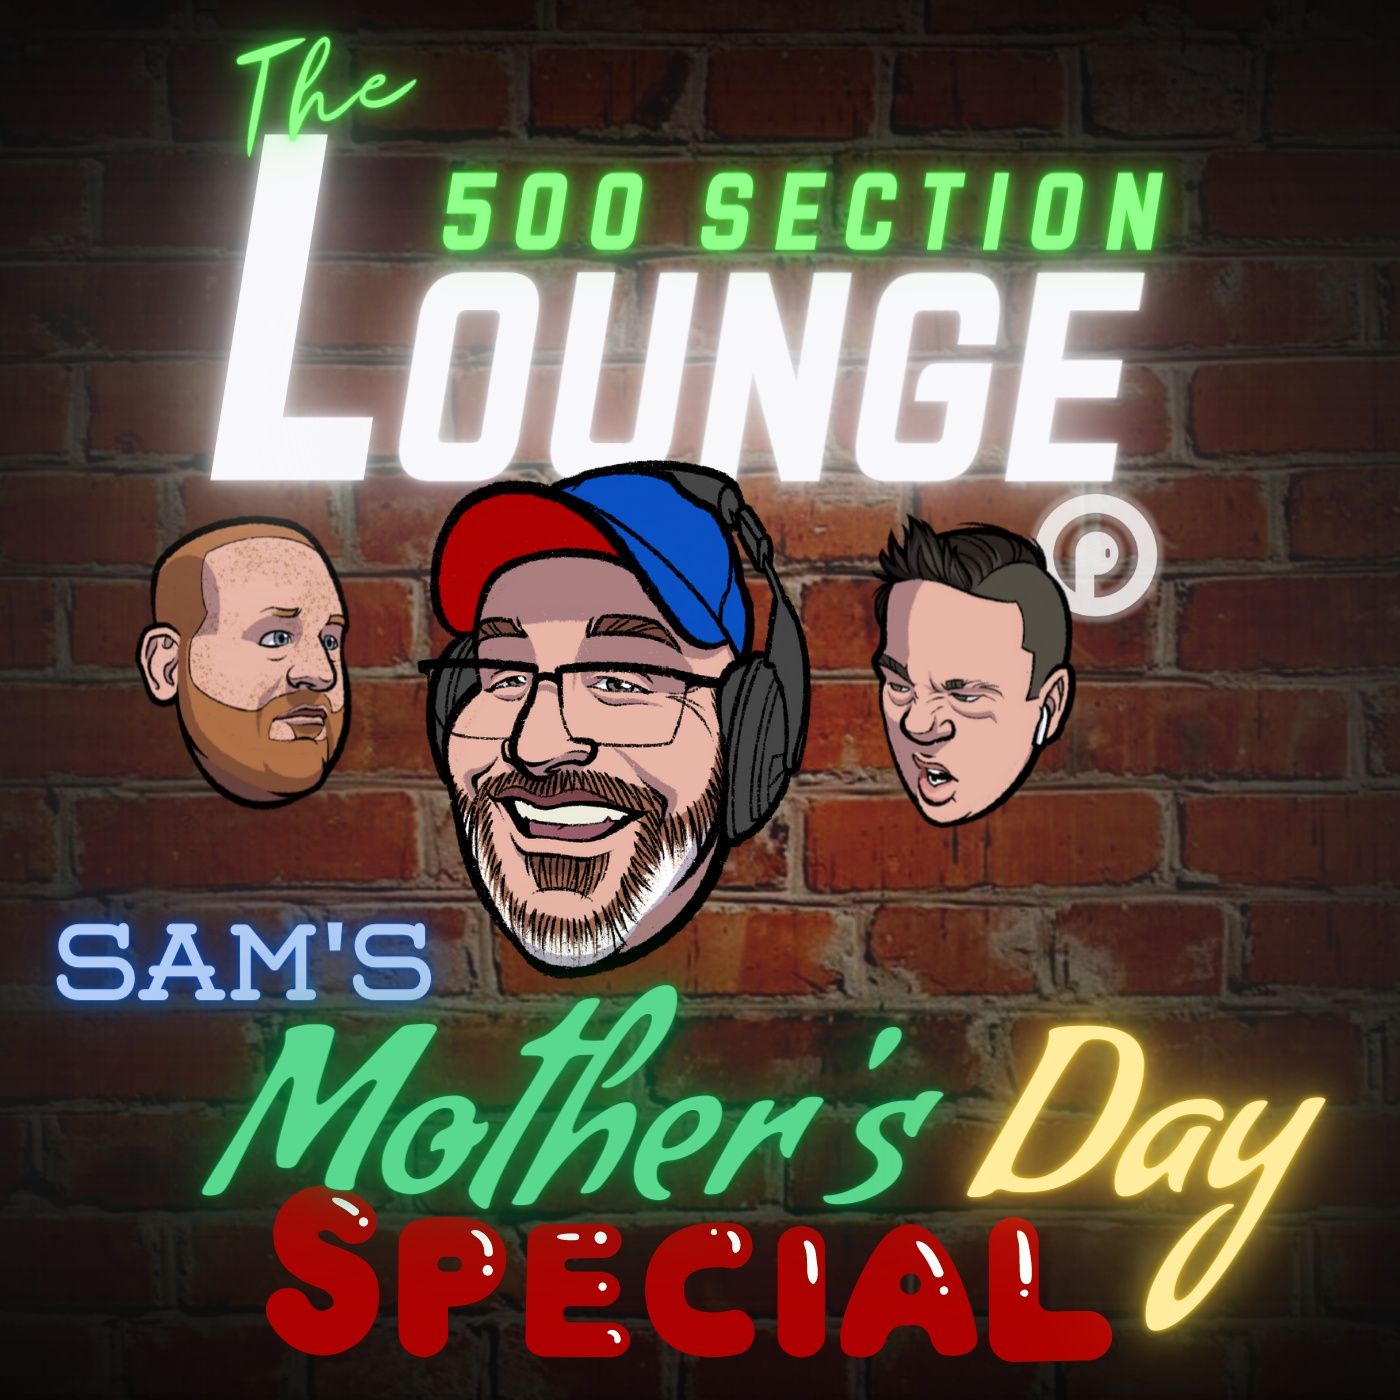 Sam's Mother's Day Special Image